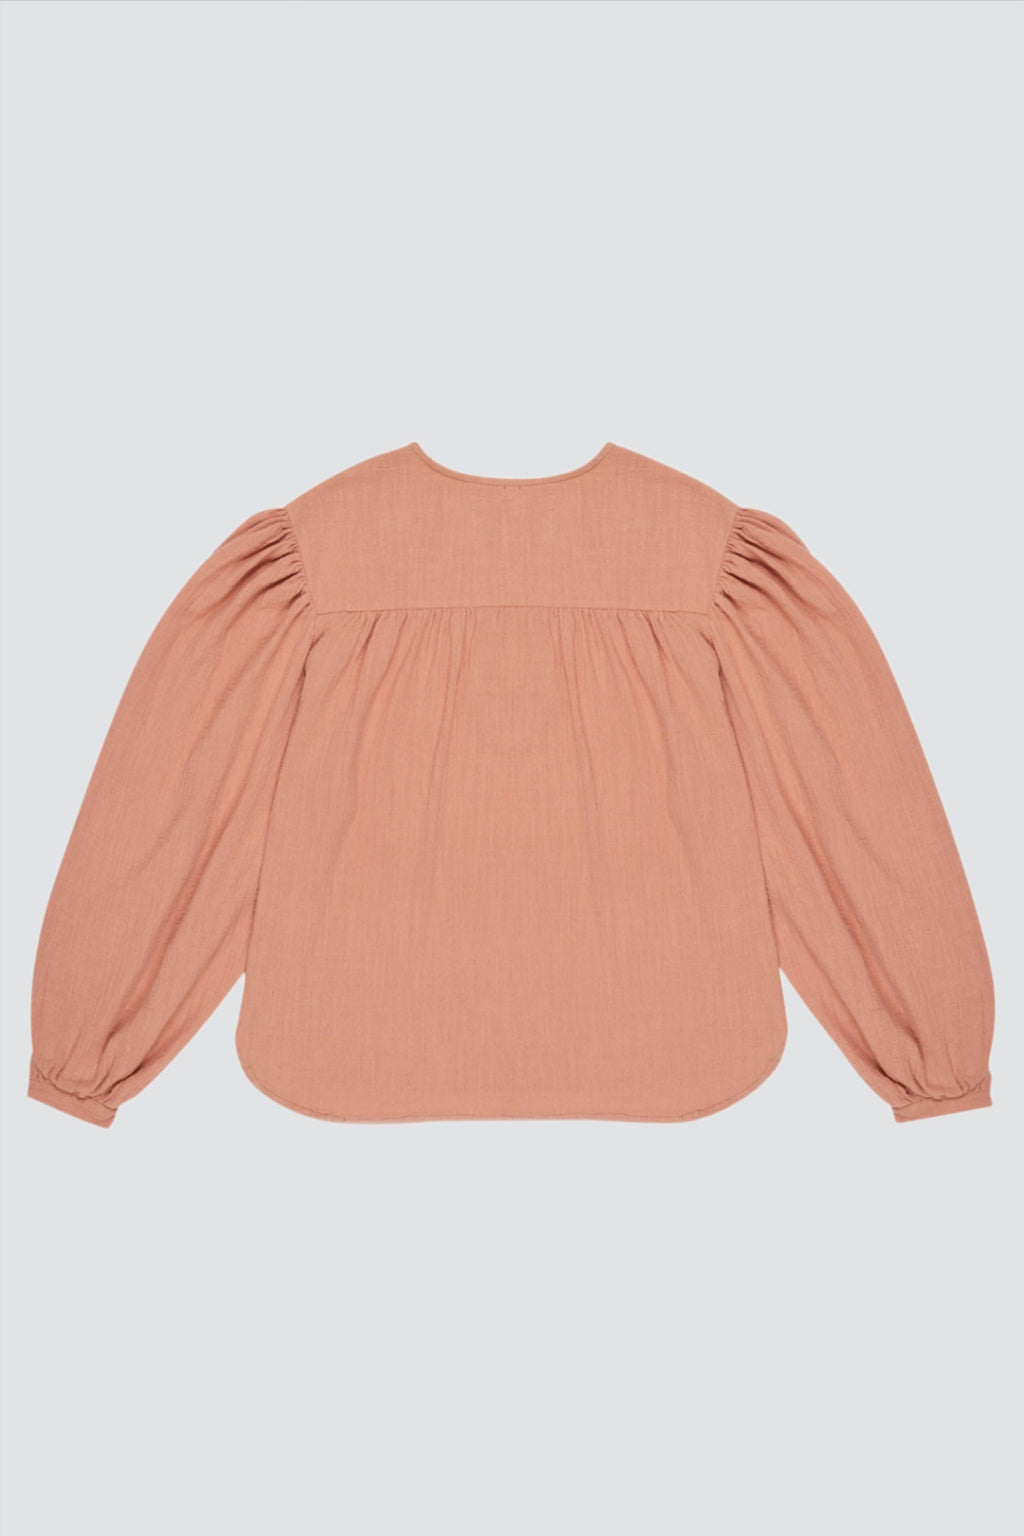 Melrose Blouse - Canyon Clay